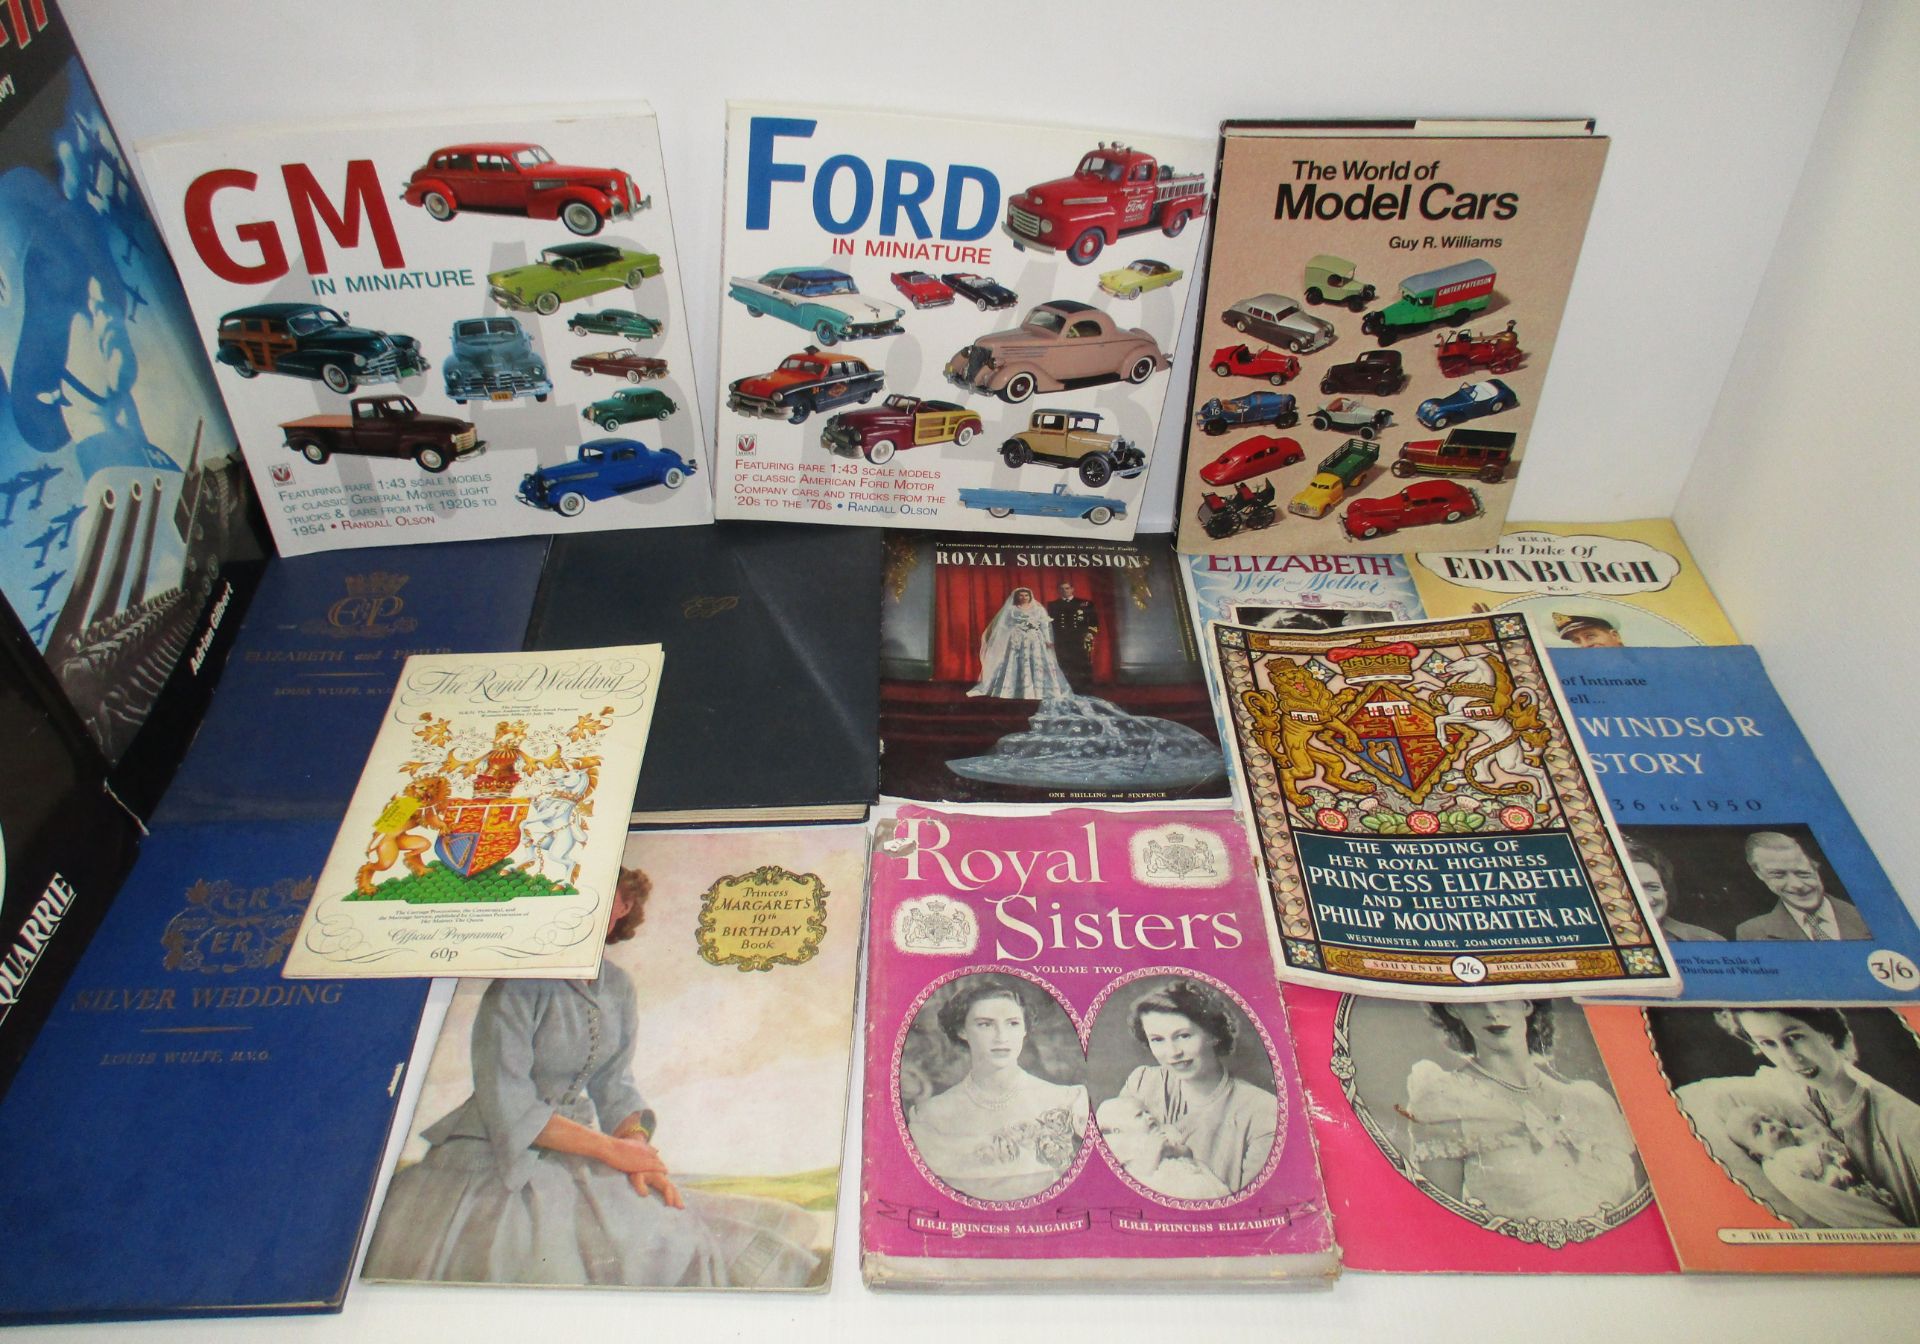 A quantity of books, programmes and magazines relating to the Royal Family, Royal Weddings, etc.